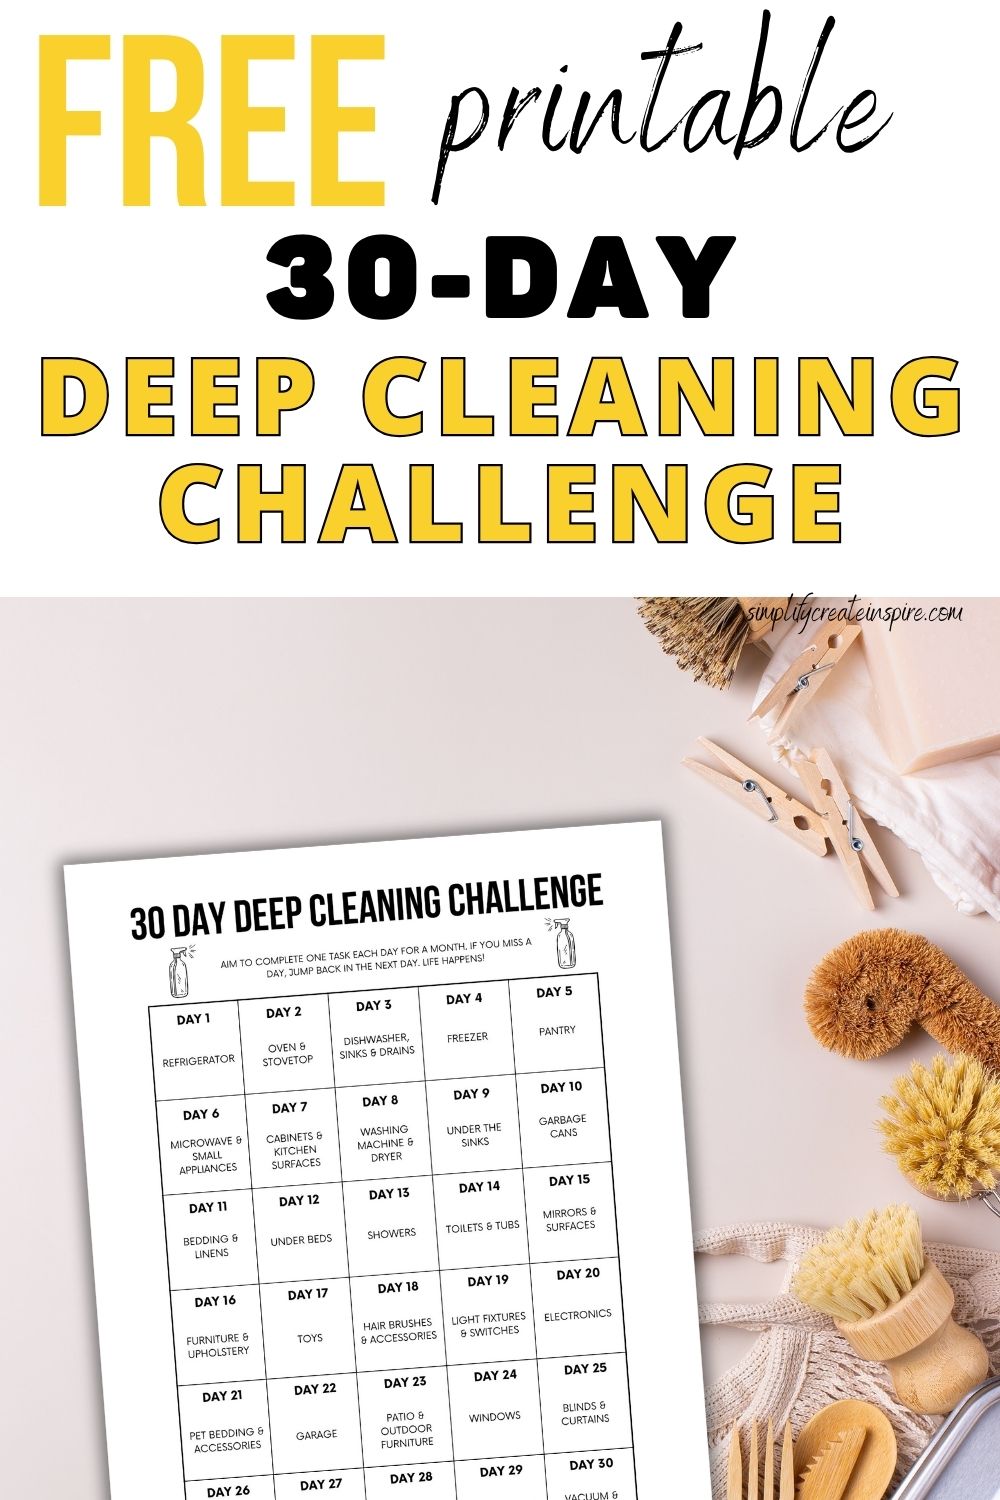 Free printable 30-day deep cleaning challenge pinterest image.